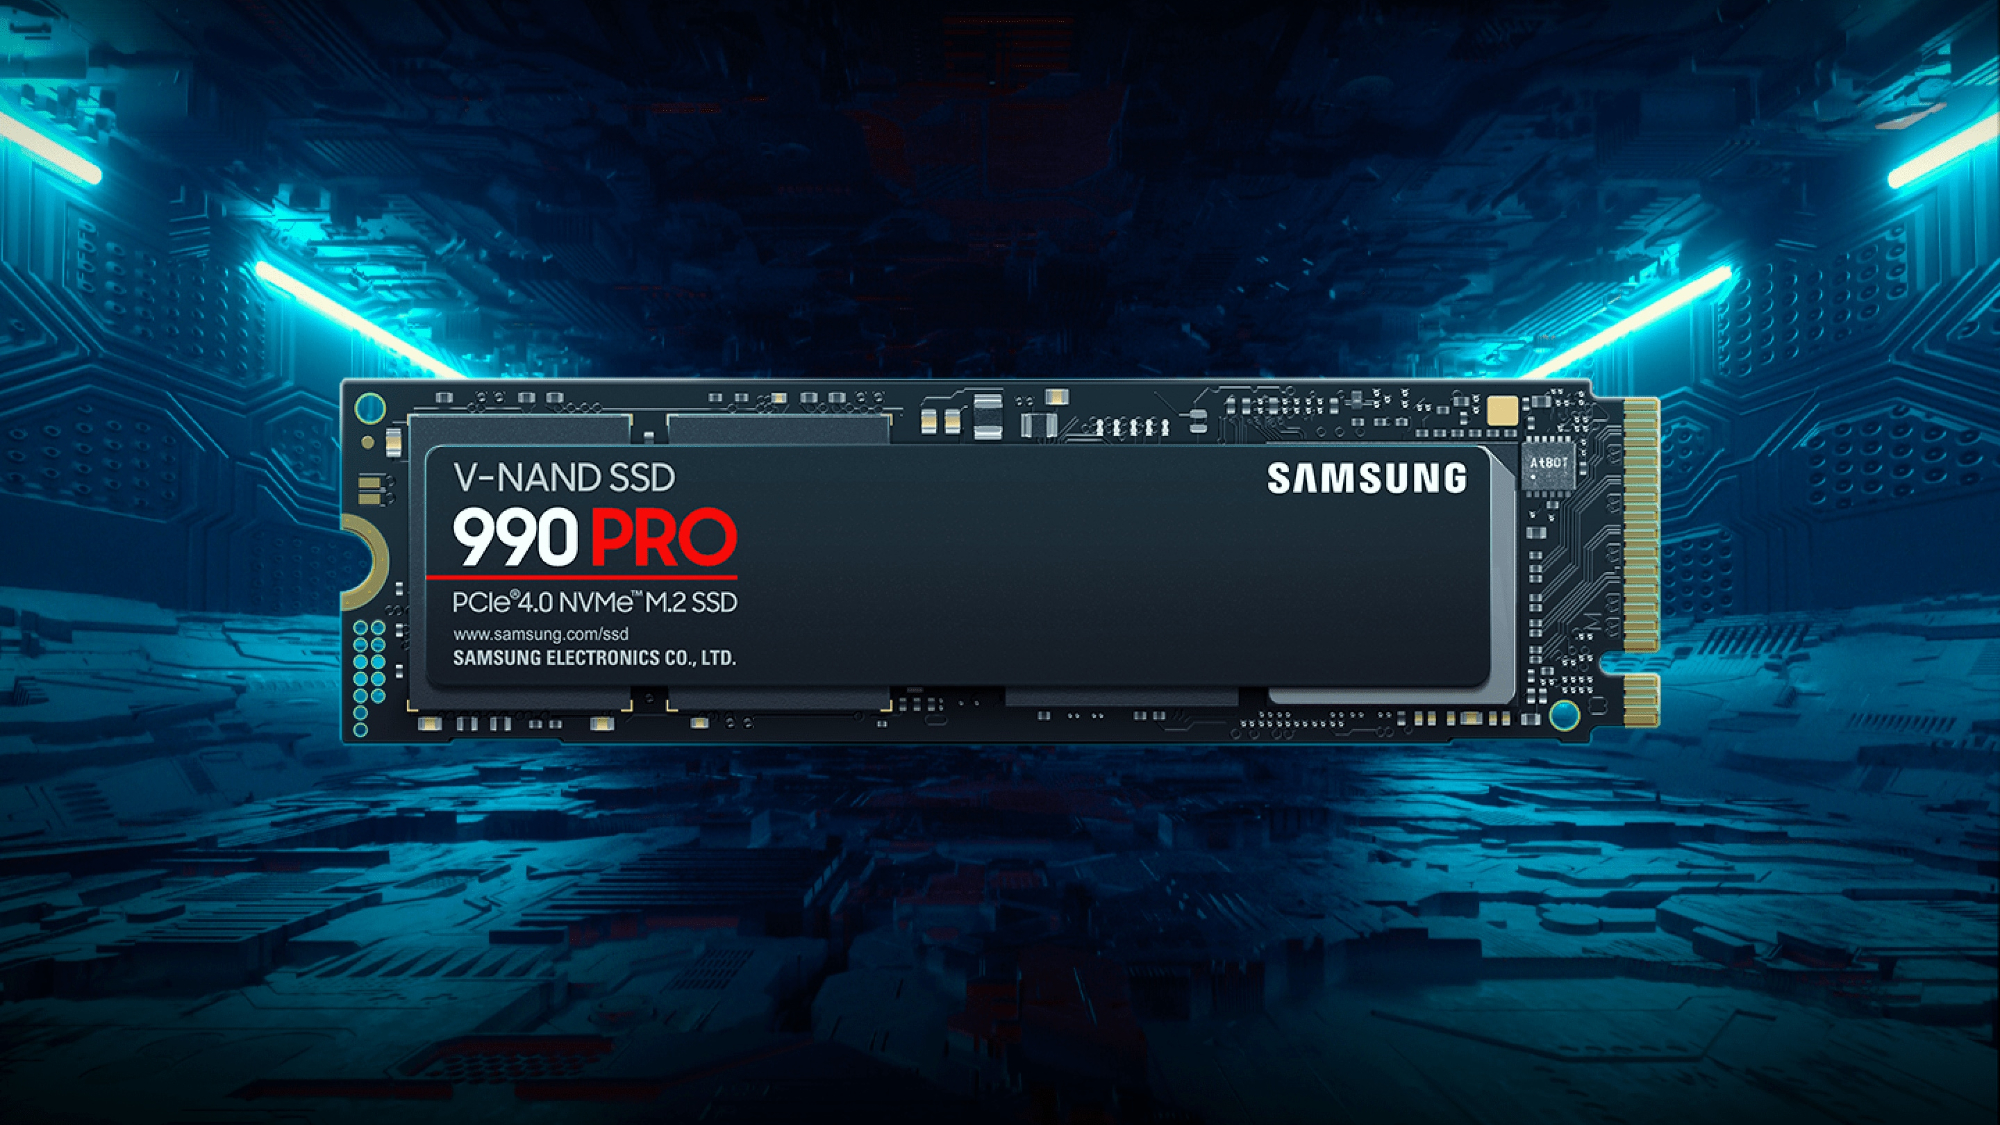 A Samsung 990 Pro SSD against a technological blue-lit background.